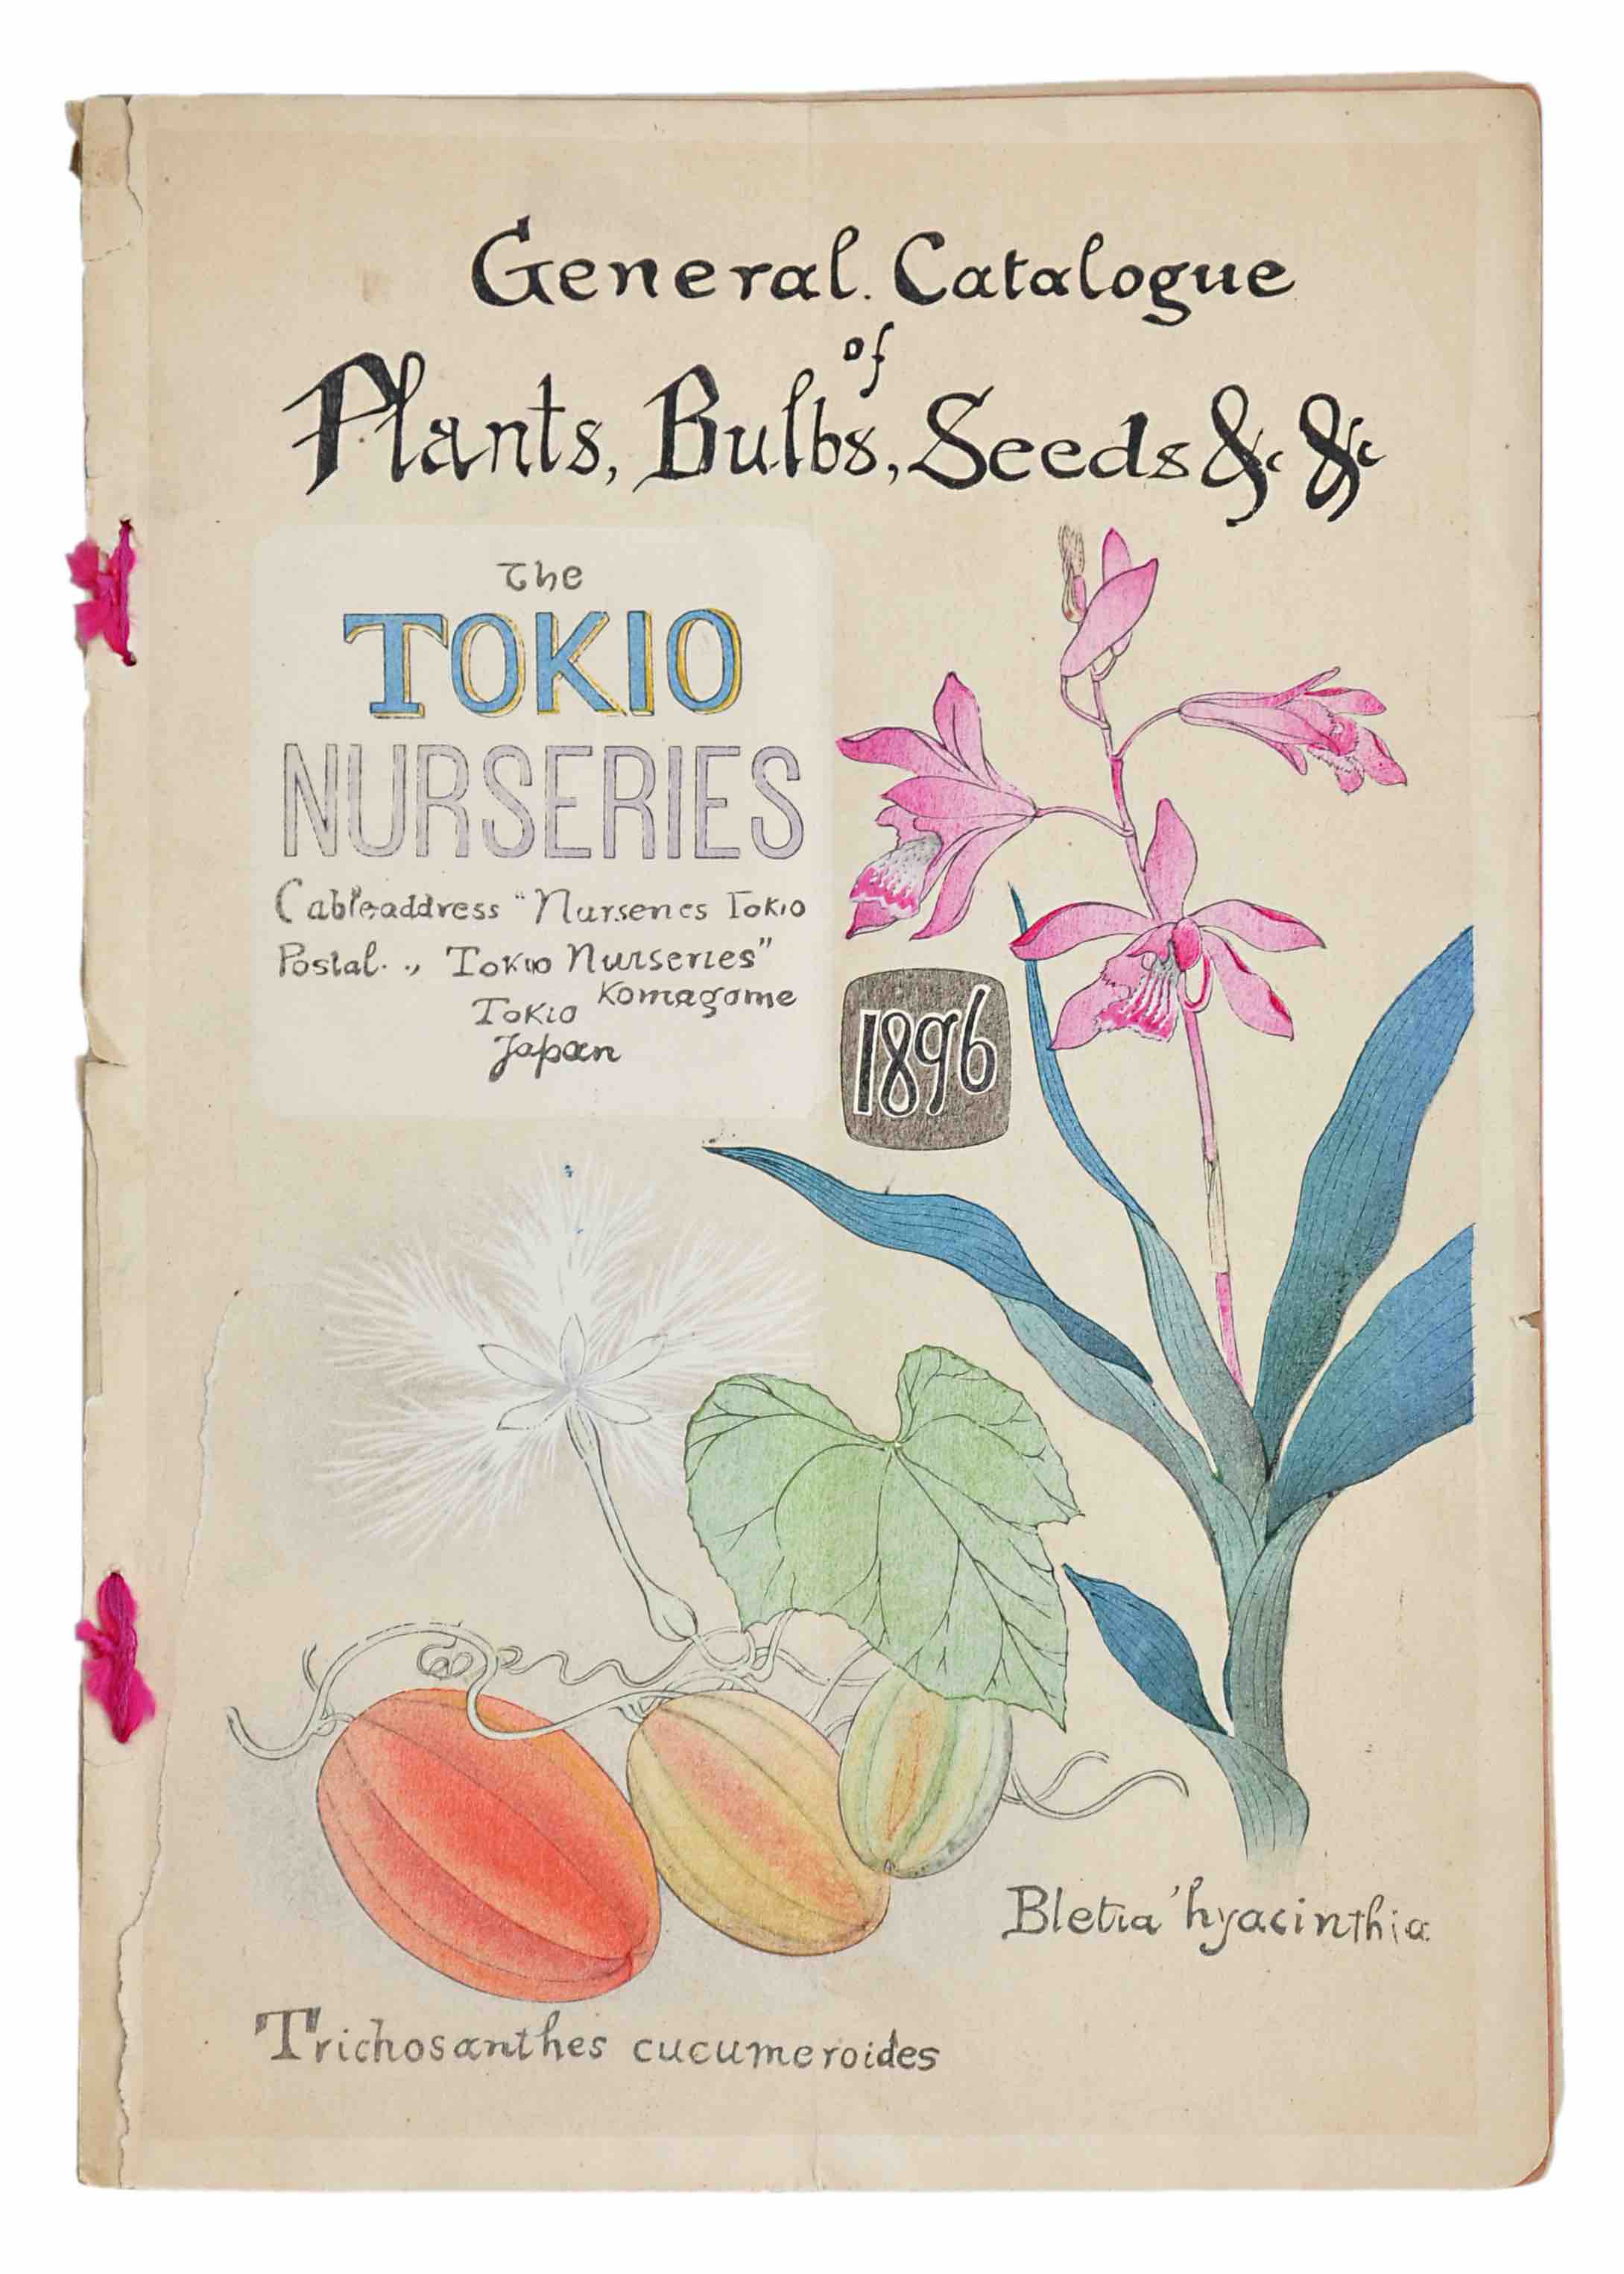 TOKYO NURSERIES: - [PLANT TRADE CATALOGUE] General Catalogue of Plants, Bulbs, Seeds & &. The Tokyo Nurseries. Headquarters for Lilly Bulbs. Tokyo, Aoyama Industrial Press, 1896.